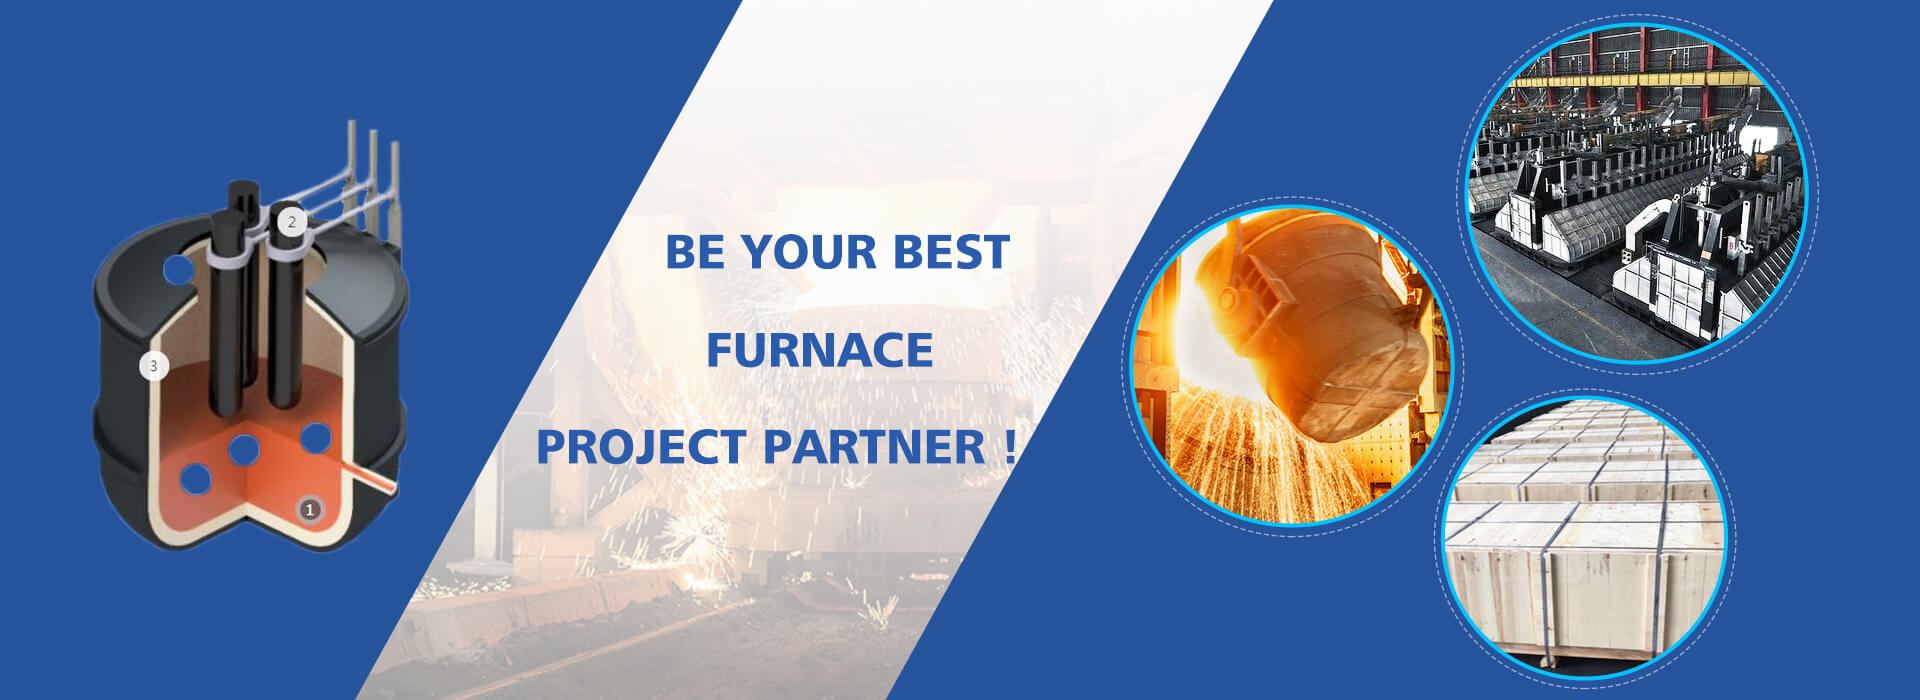 Be your best furnace project partner !